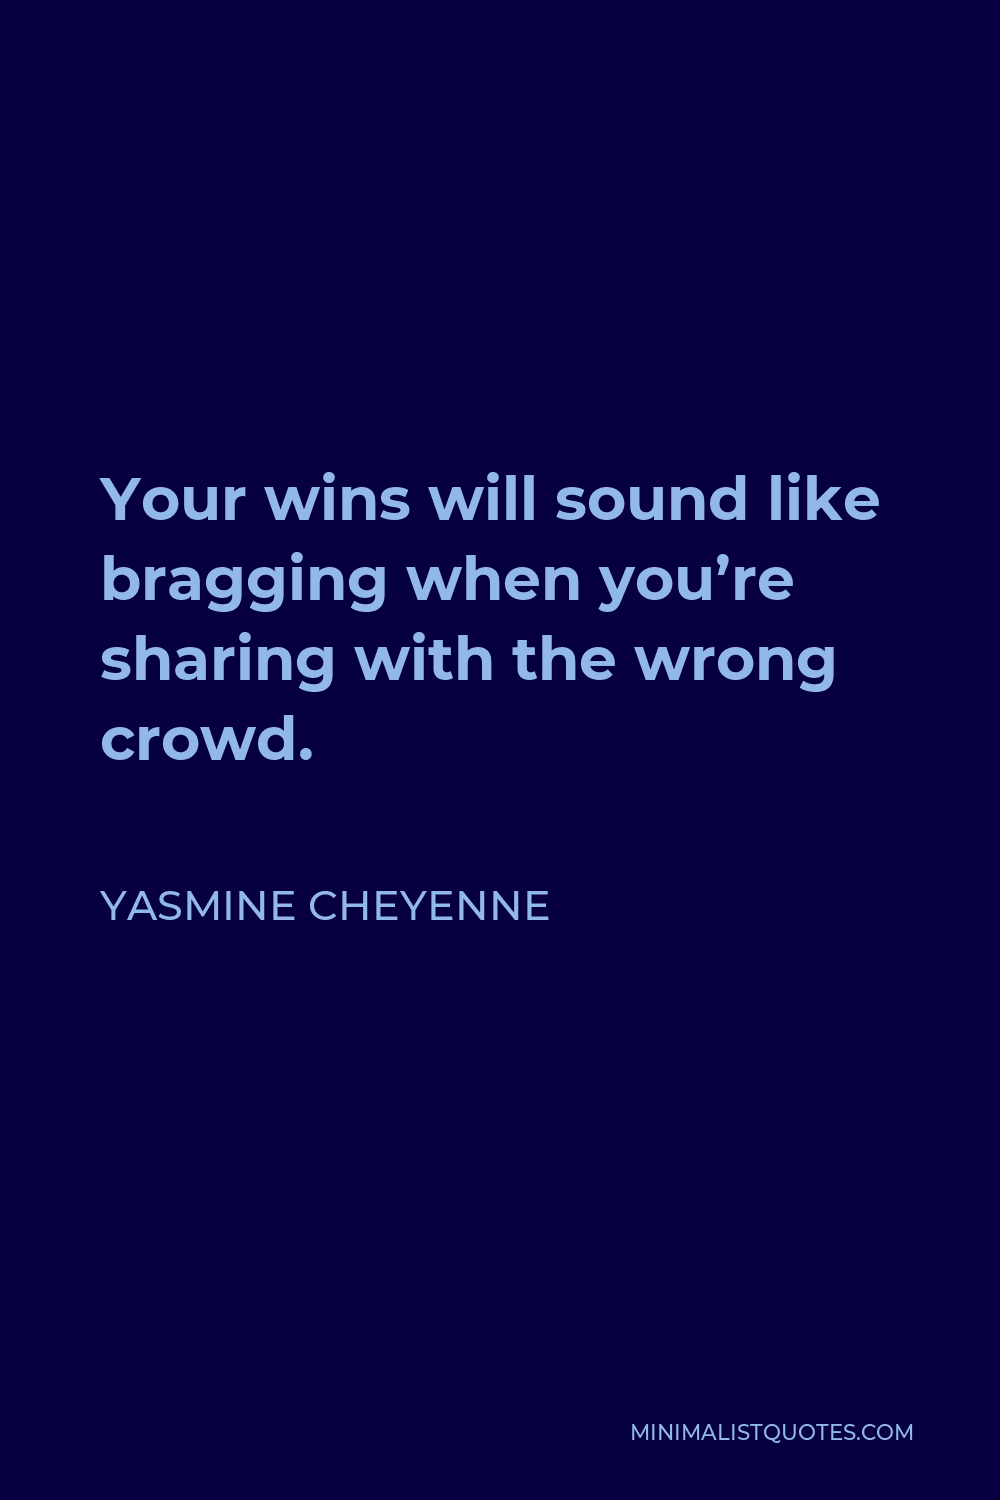 Yasmine Cheyenne Quote - Your wins will sound like bragging when you’re sharing with the wrong crowd.